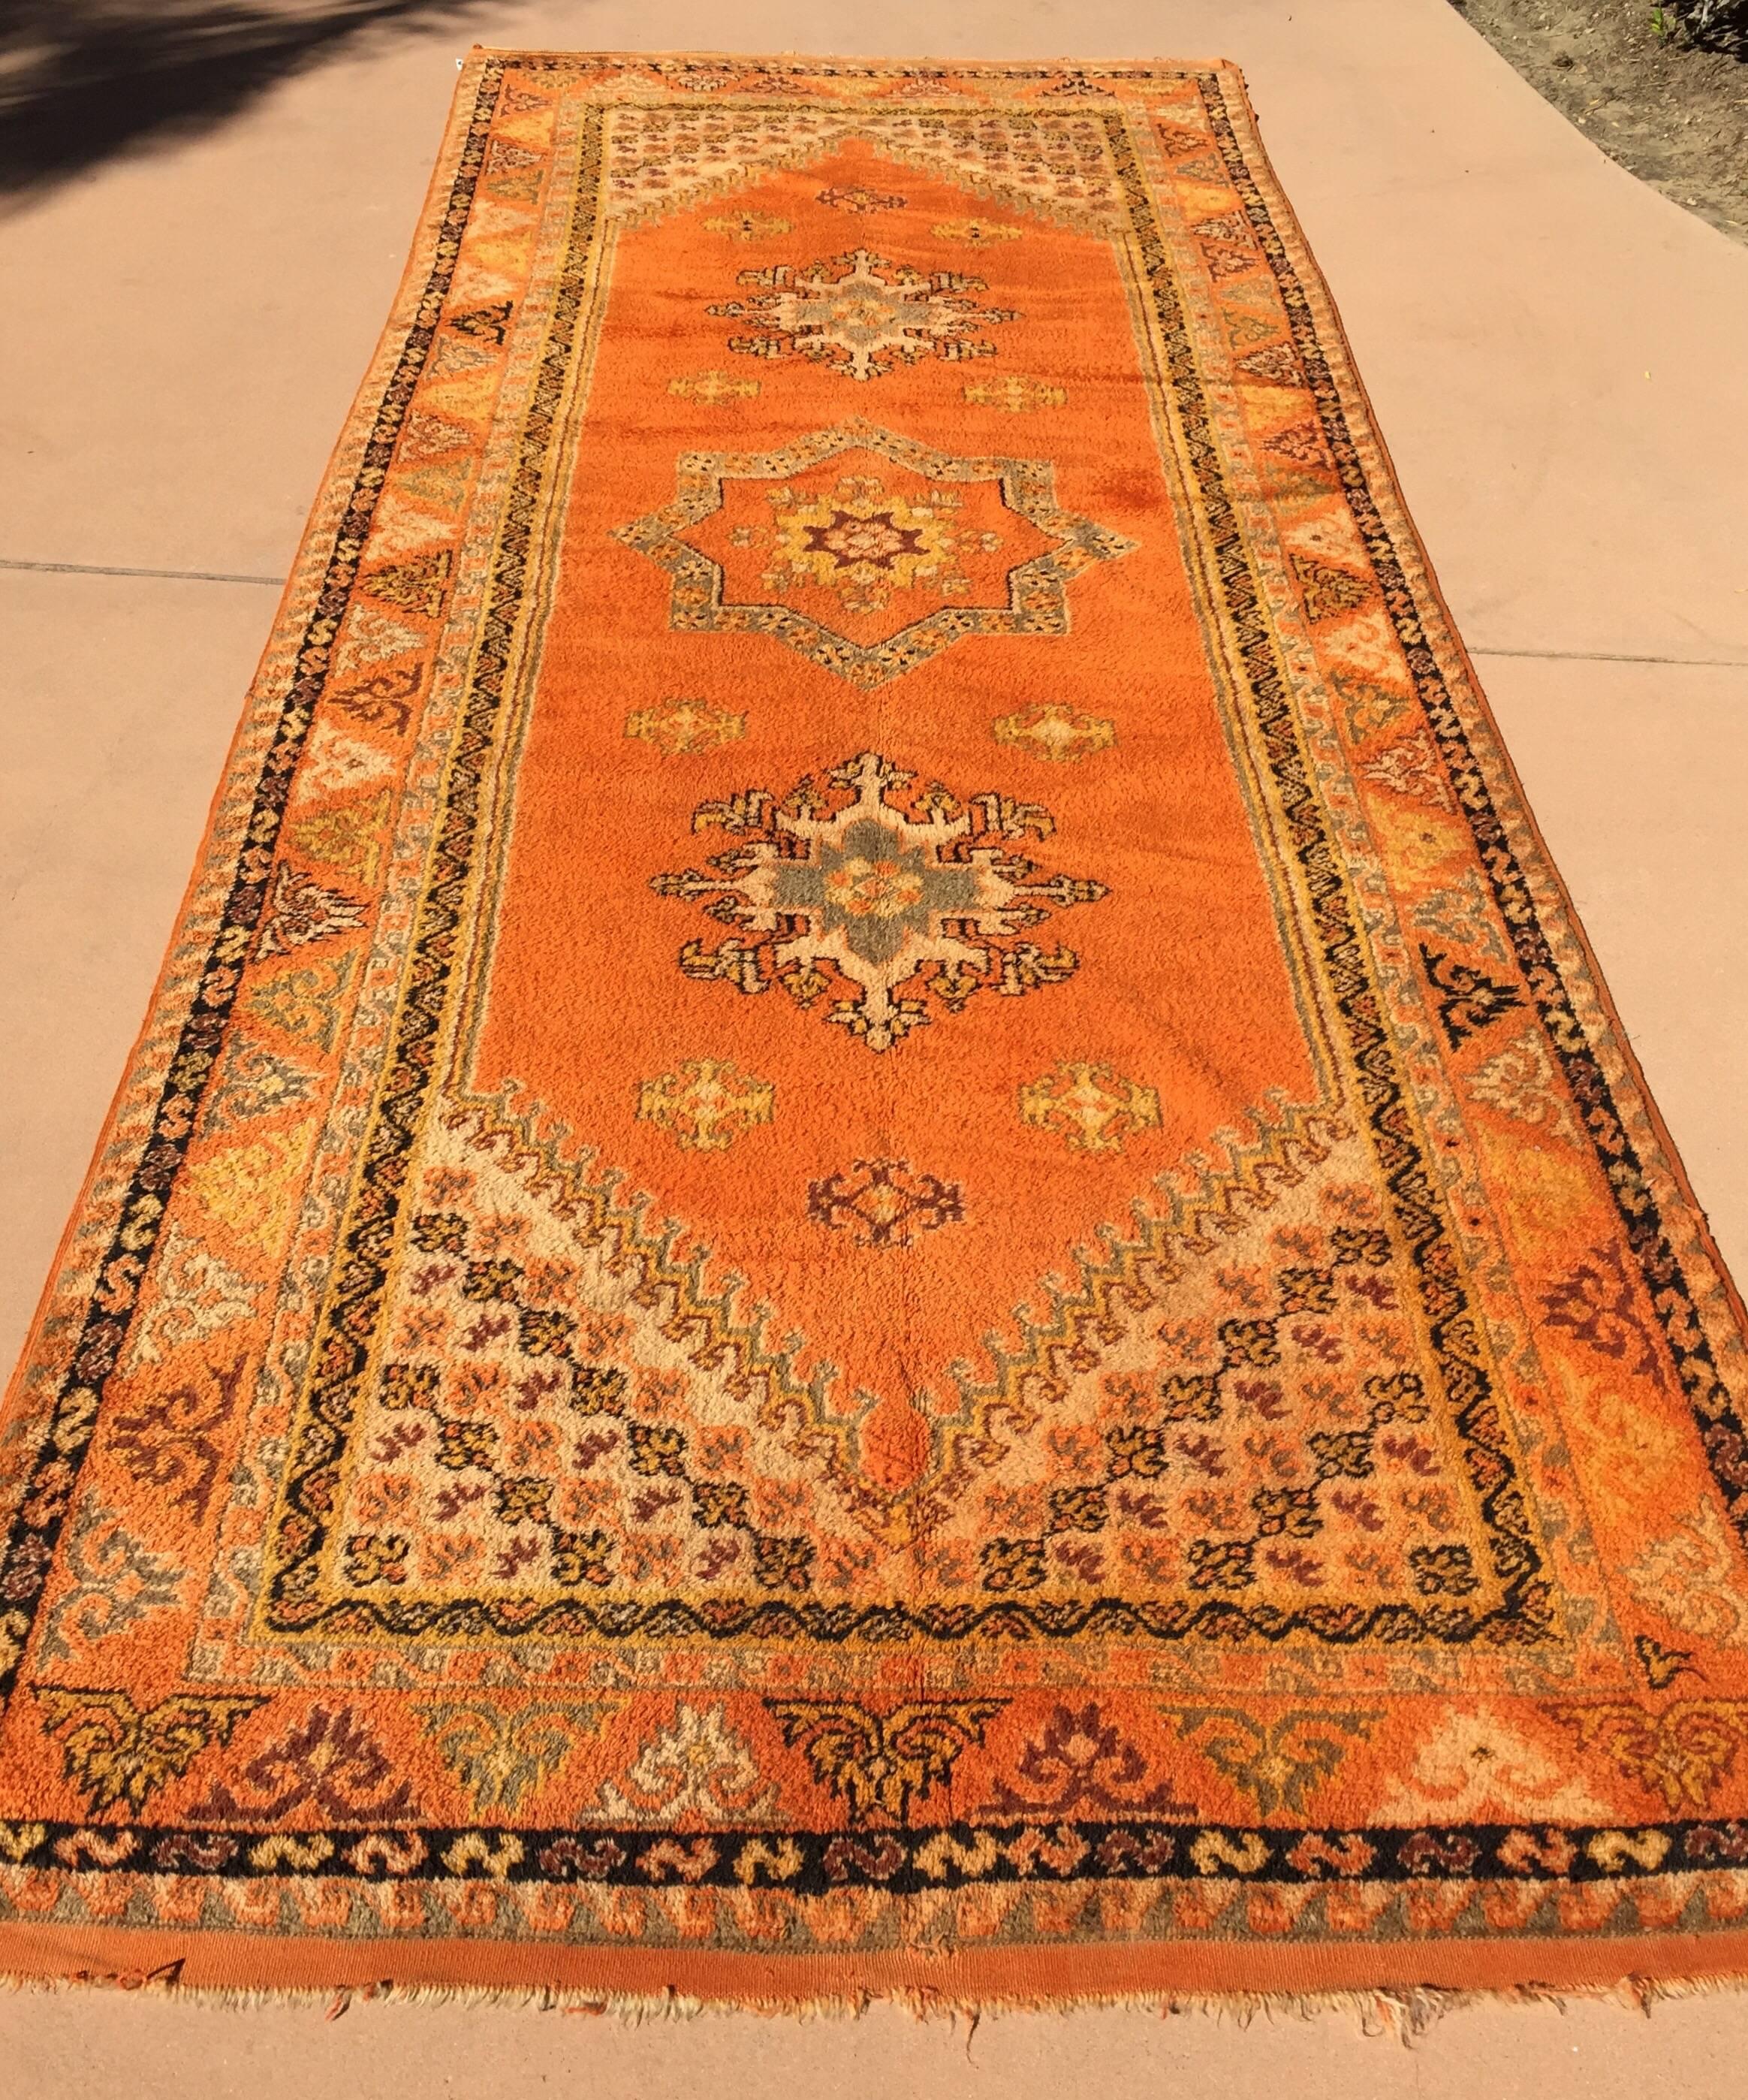 1960s authentic Moroccan vintage orange cor tribal African pile rug.Wonderf work of art, bright oranges geometrical design, free style, amazing vintage Moroccan runner.Handwoven by the Berber women in Morocco, organic lamb wo in vegetable